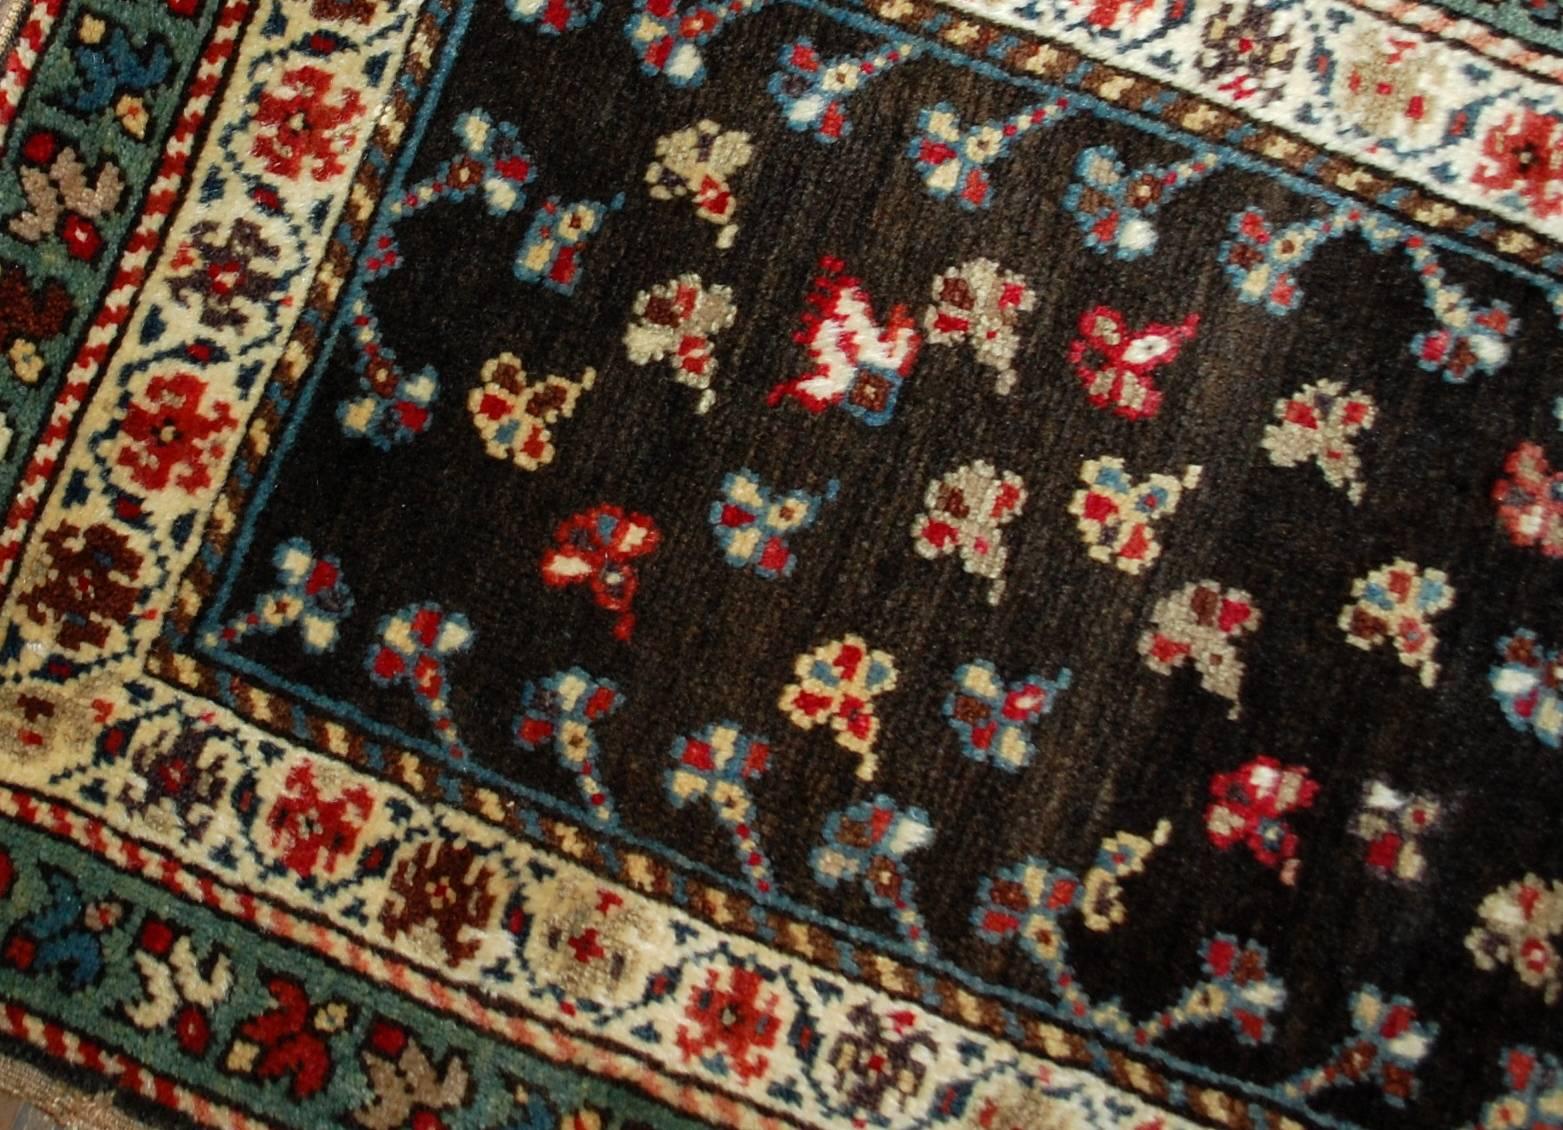 Antique handmade Caucasian Gendje rug in good condition. The rug has beautiful chocolate brown background covered in colorful flowers. Two borders are surrounding the central area: beige and azure. The rug has been restored and now in good